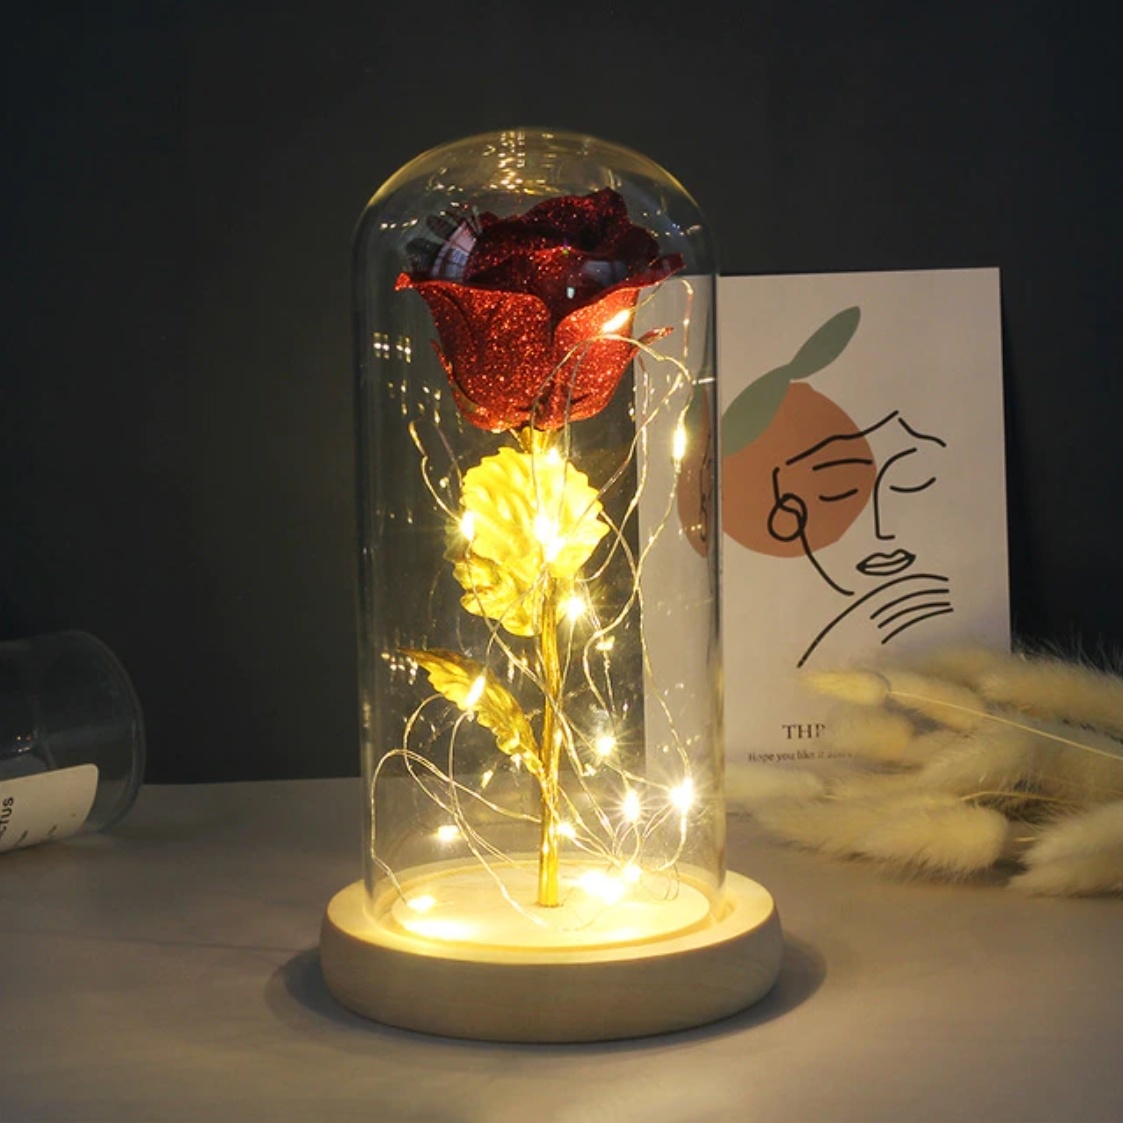 Art Rose in Glass Bell Jar with Lighting - Silk Roses Flowers Luxury Glass Decor Ornament